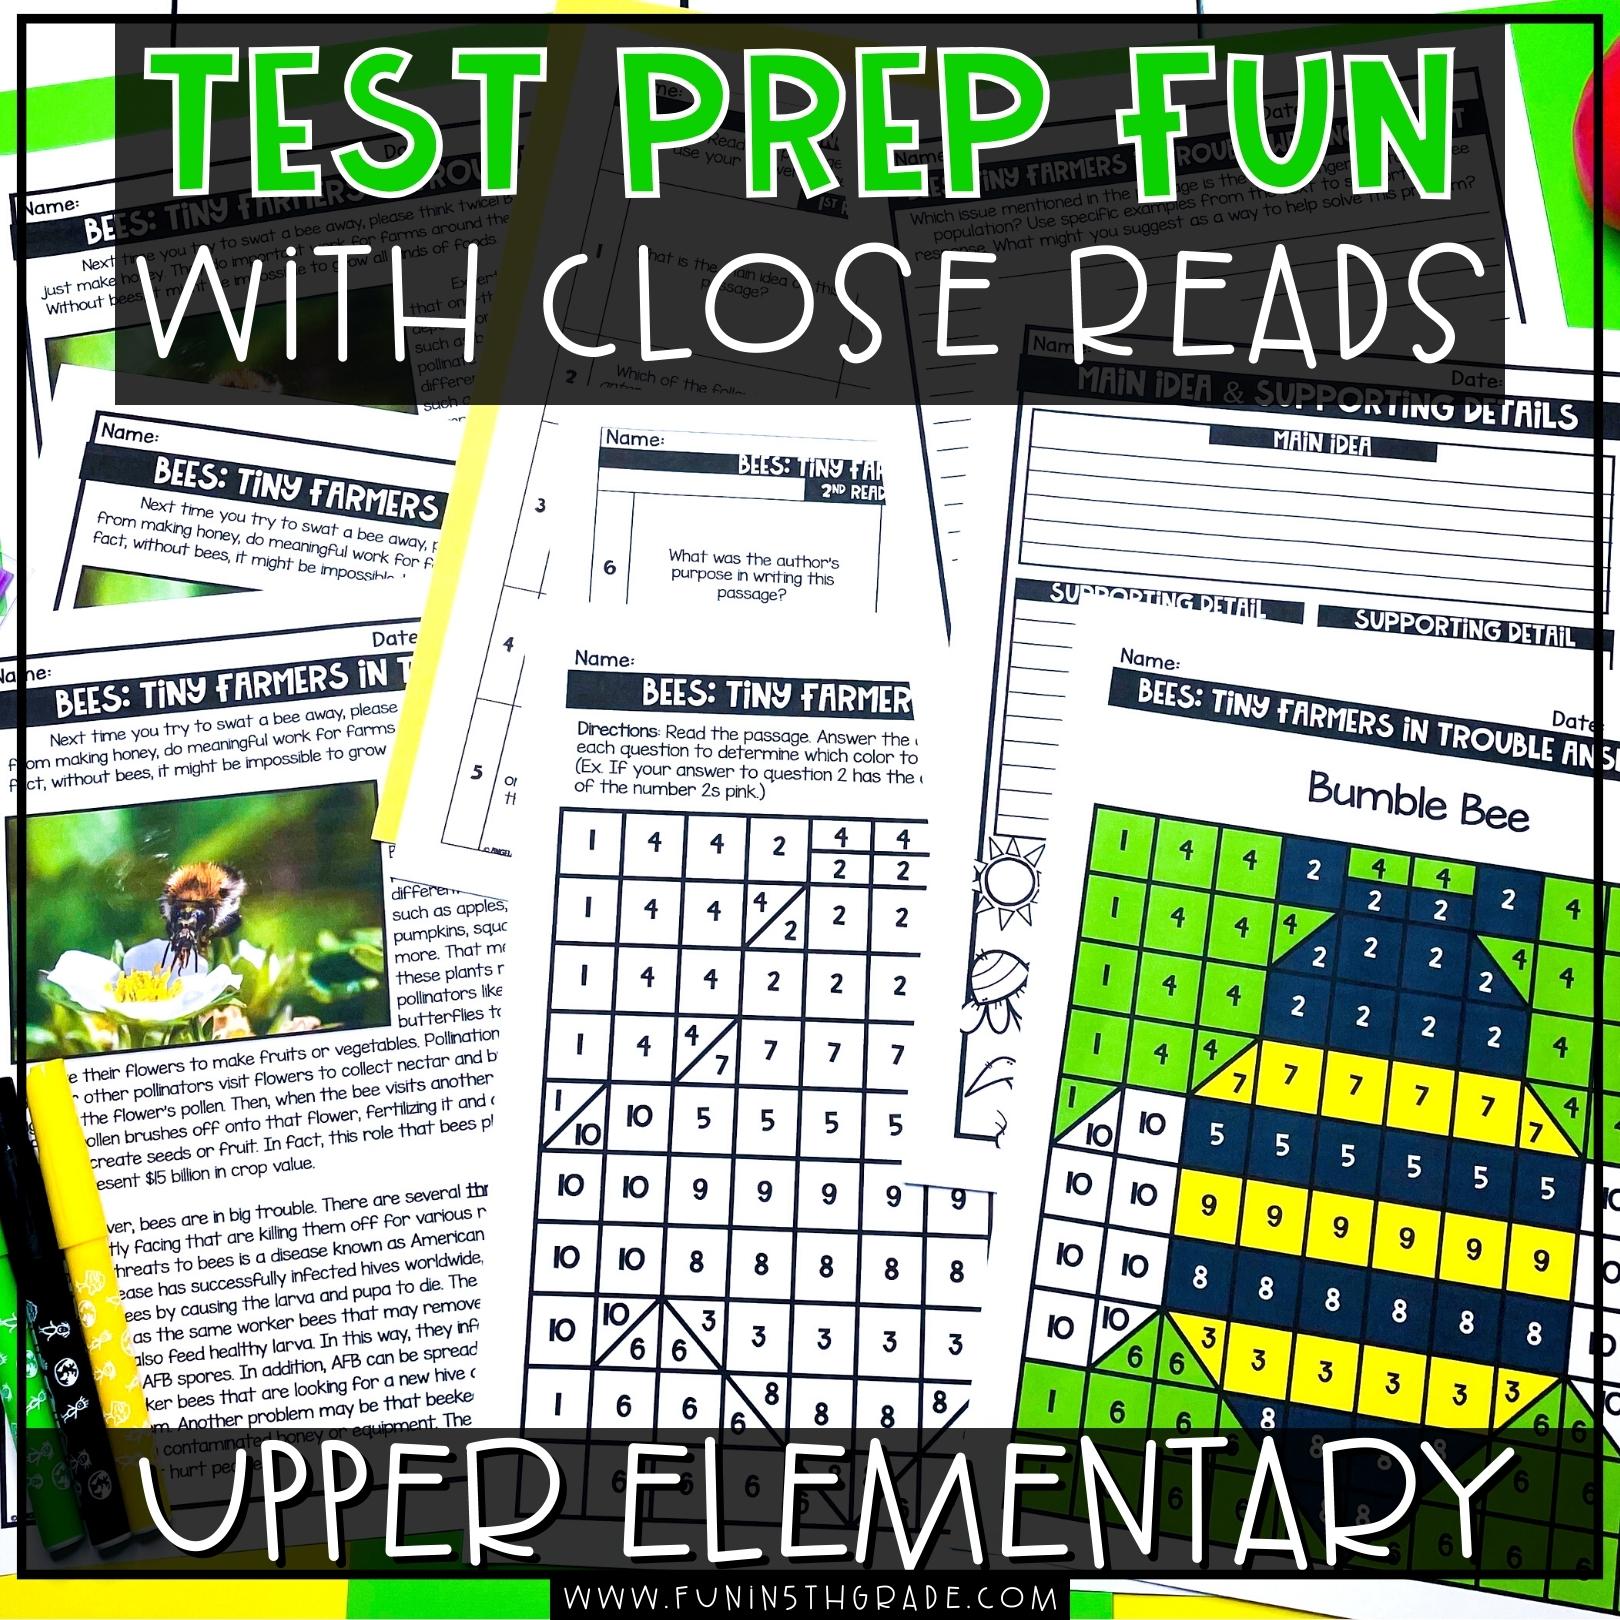 Test Prep Fun with Close Reads Blog Image with Close Read worksheets and plants